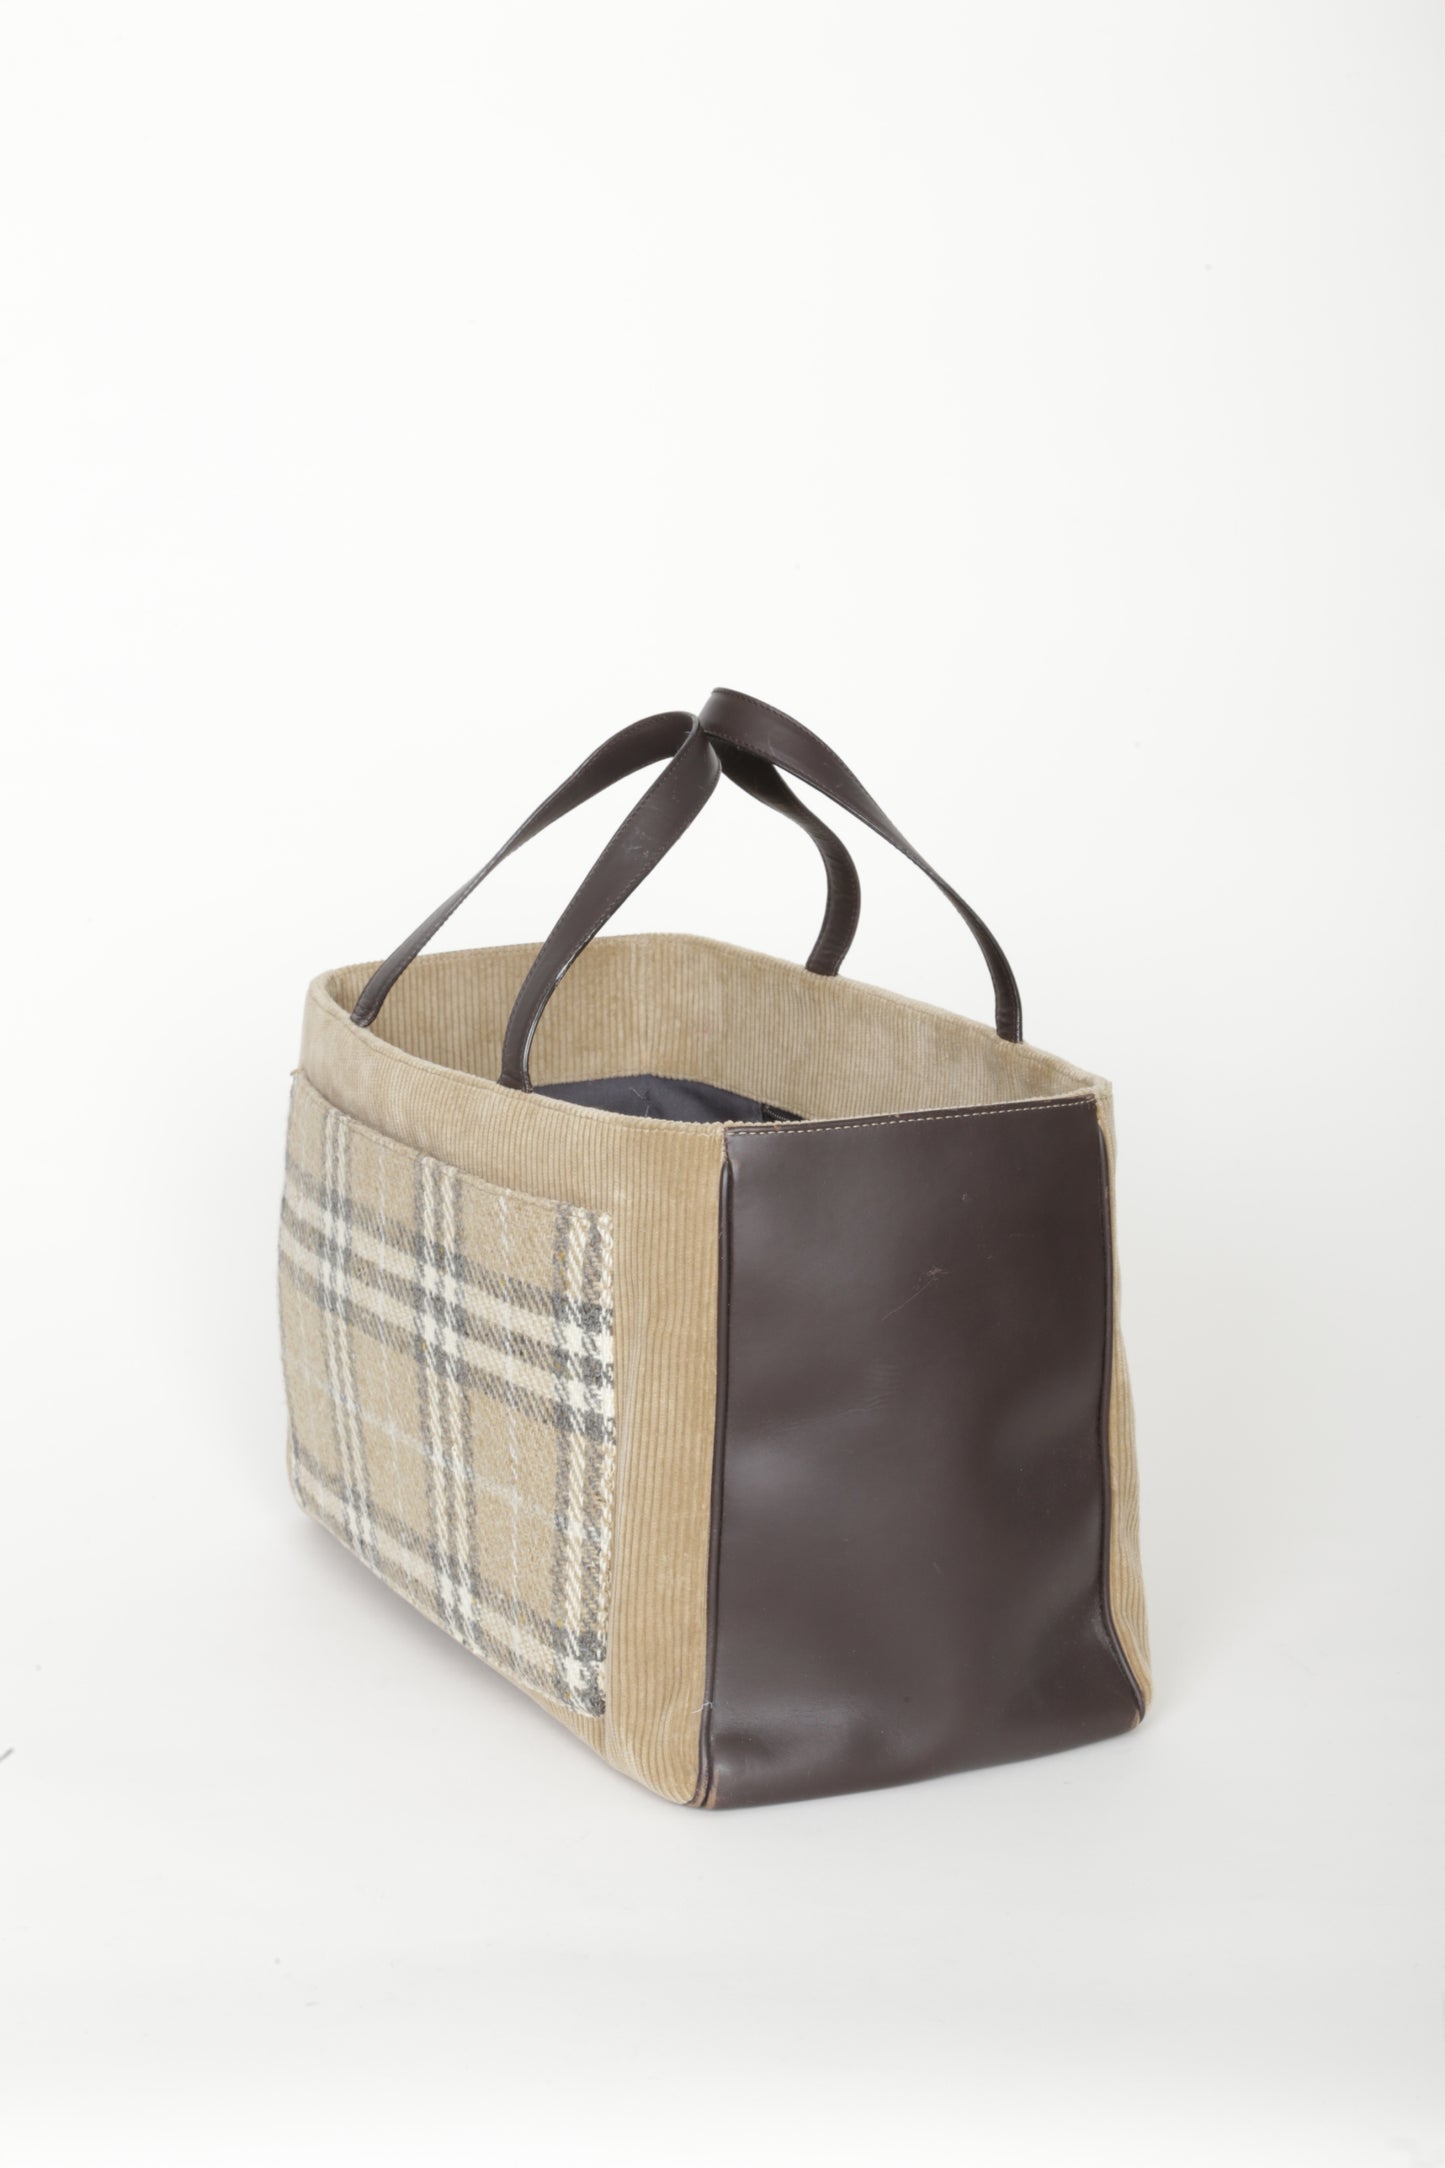 Burberry Unisex Brown Bag Size O/S